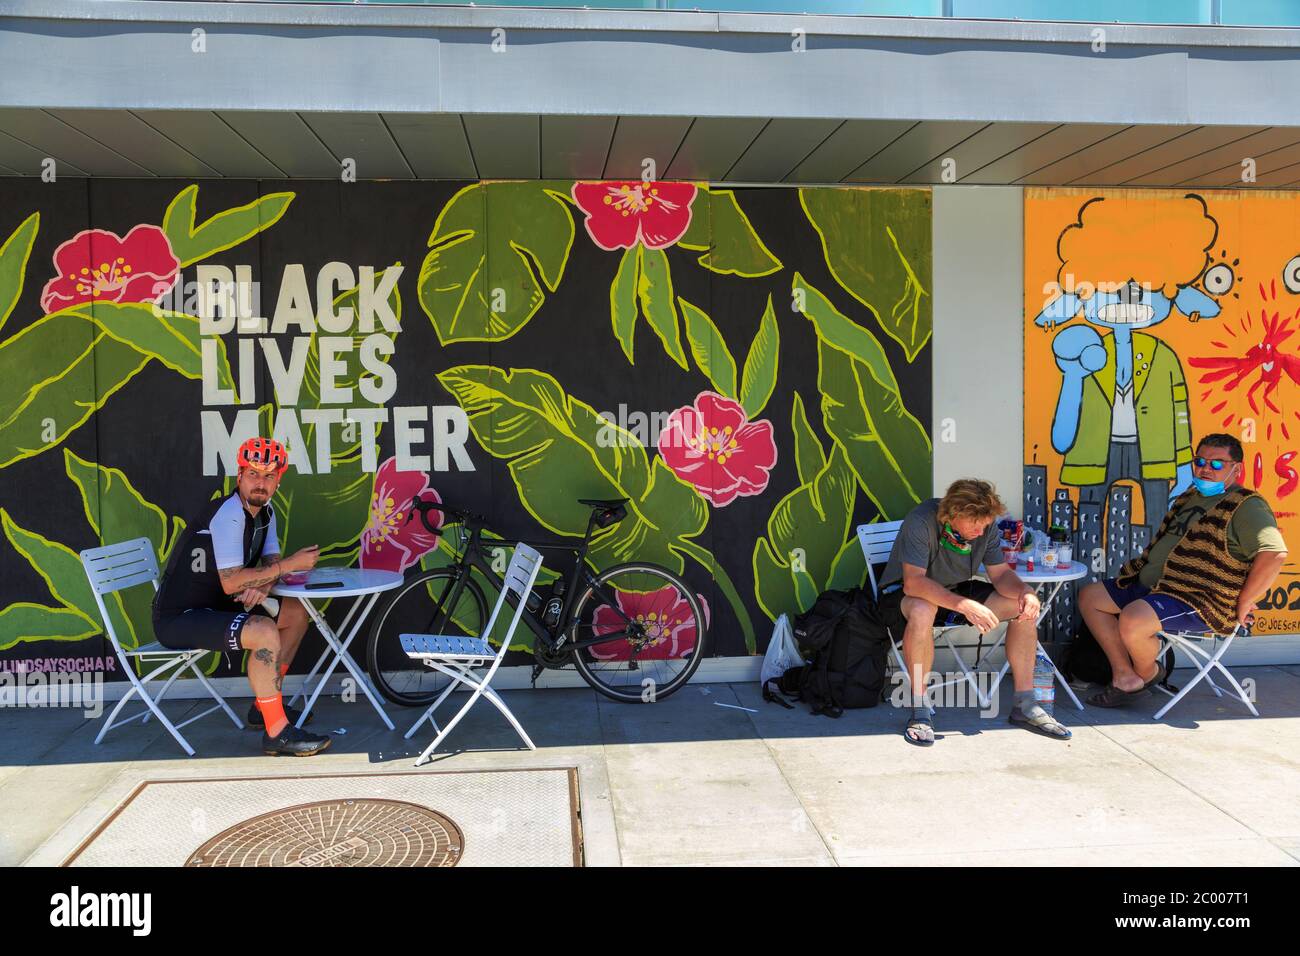 People sitting outdoors at a cafe in front of painted murals protesting the murder of George Floyd on plywood boards covering storefront windows on Lincoln Blvd, Santa Monica, Los Angeles,  California Stock Photo